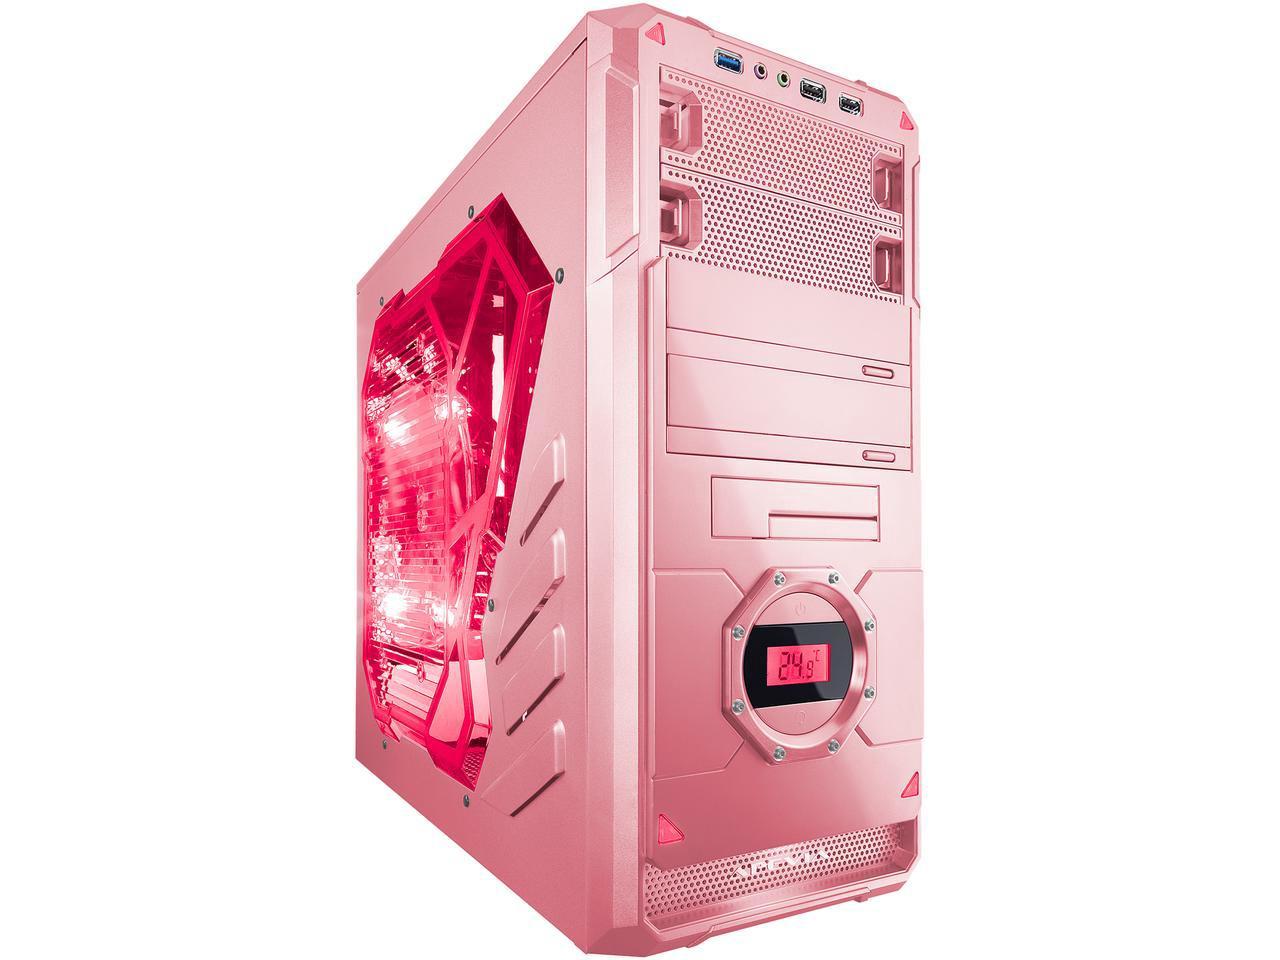 Newegg computer cases fat daddy coins